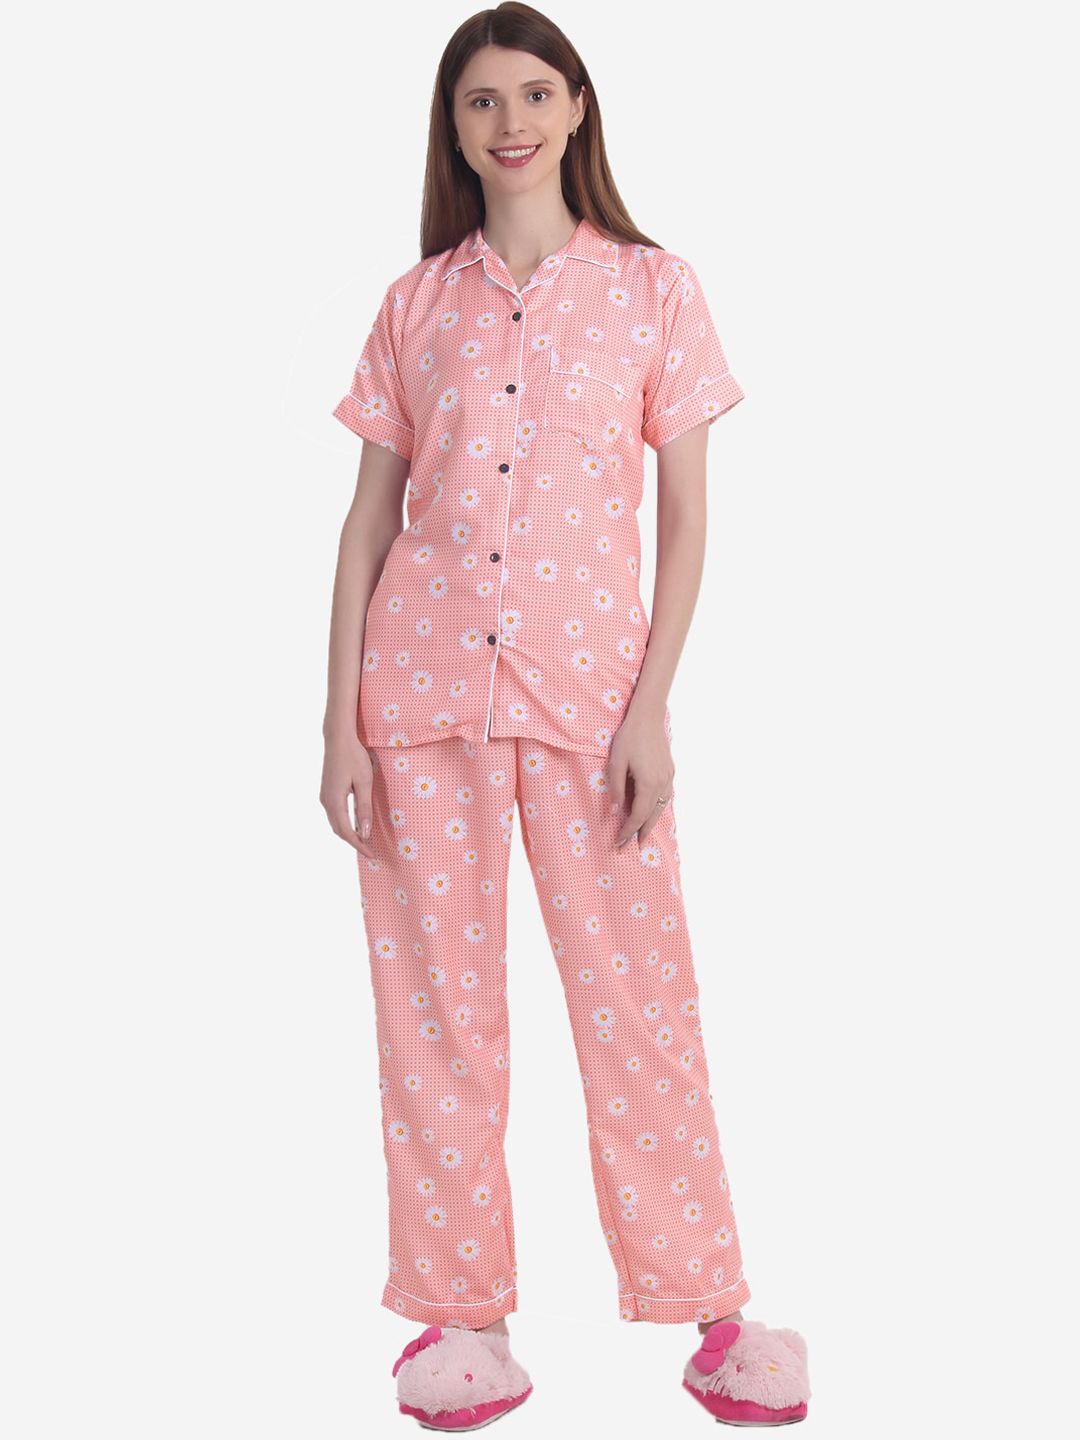 HOUSE OF JAMMIES Women Peach-Coloured Floral Printed Night Suit Price in India